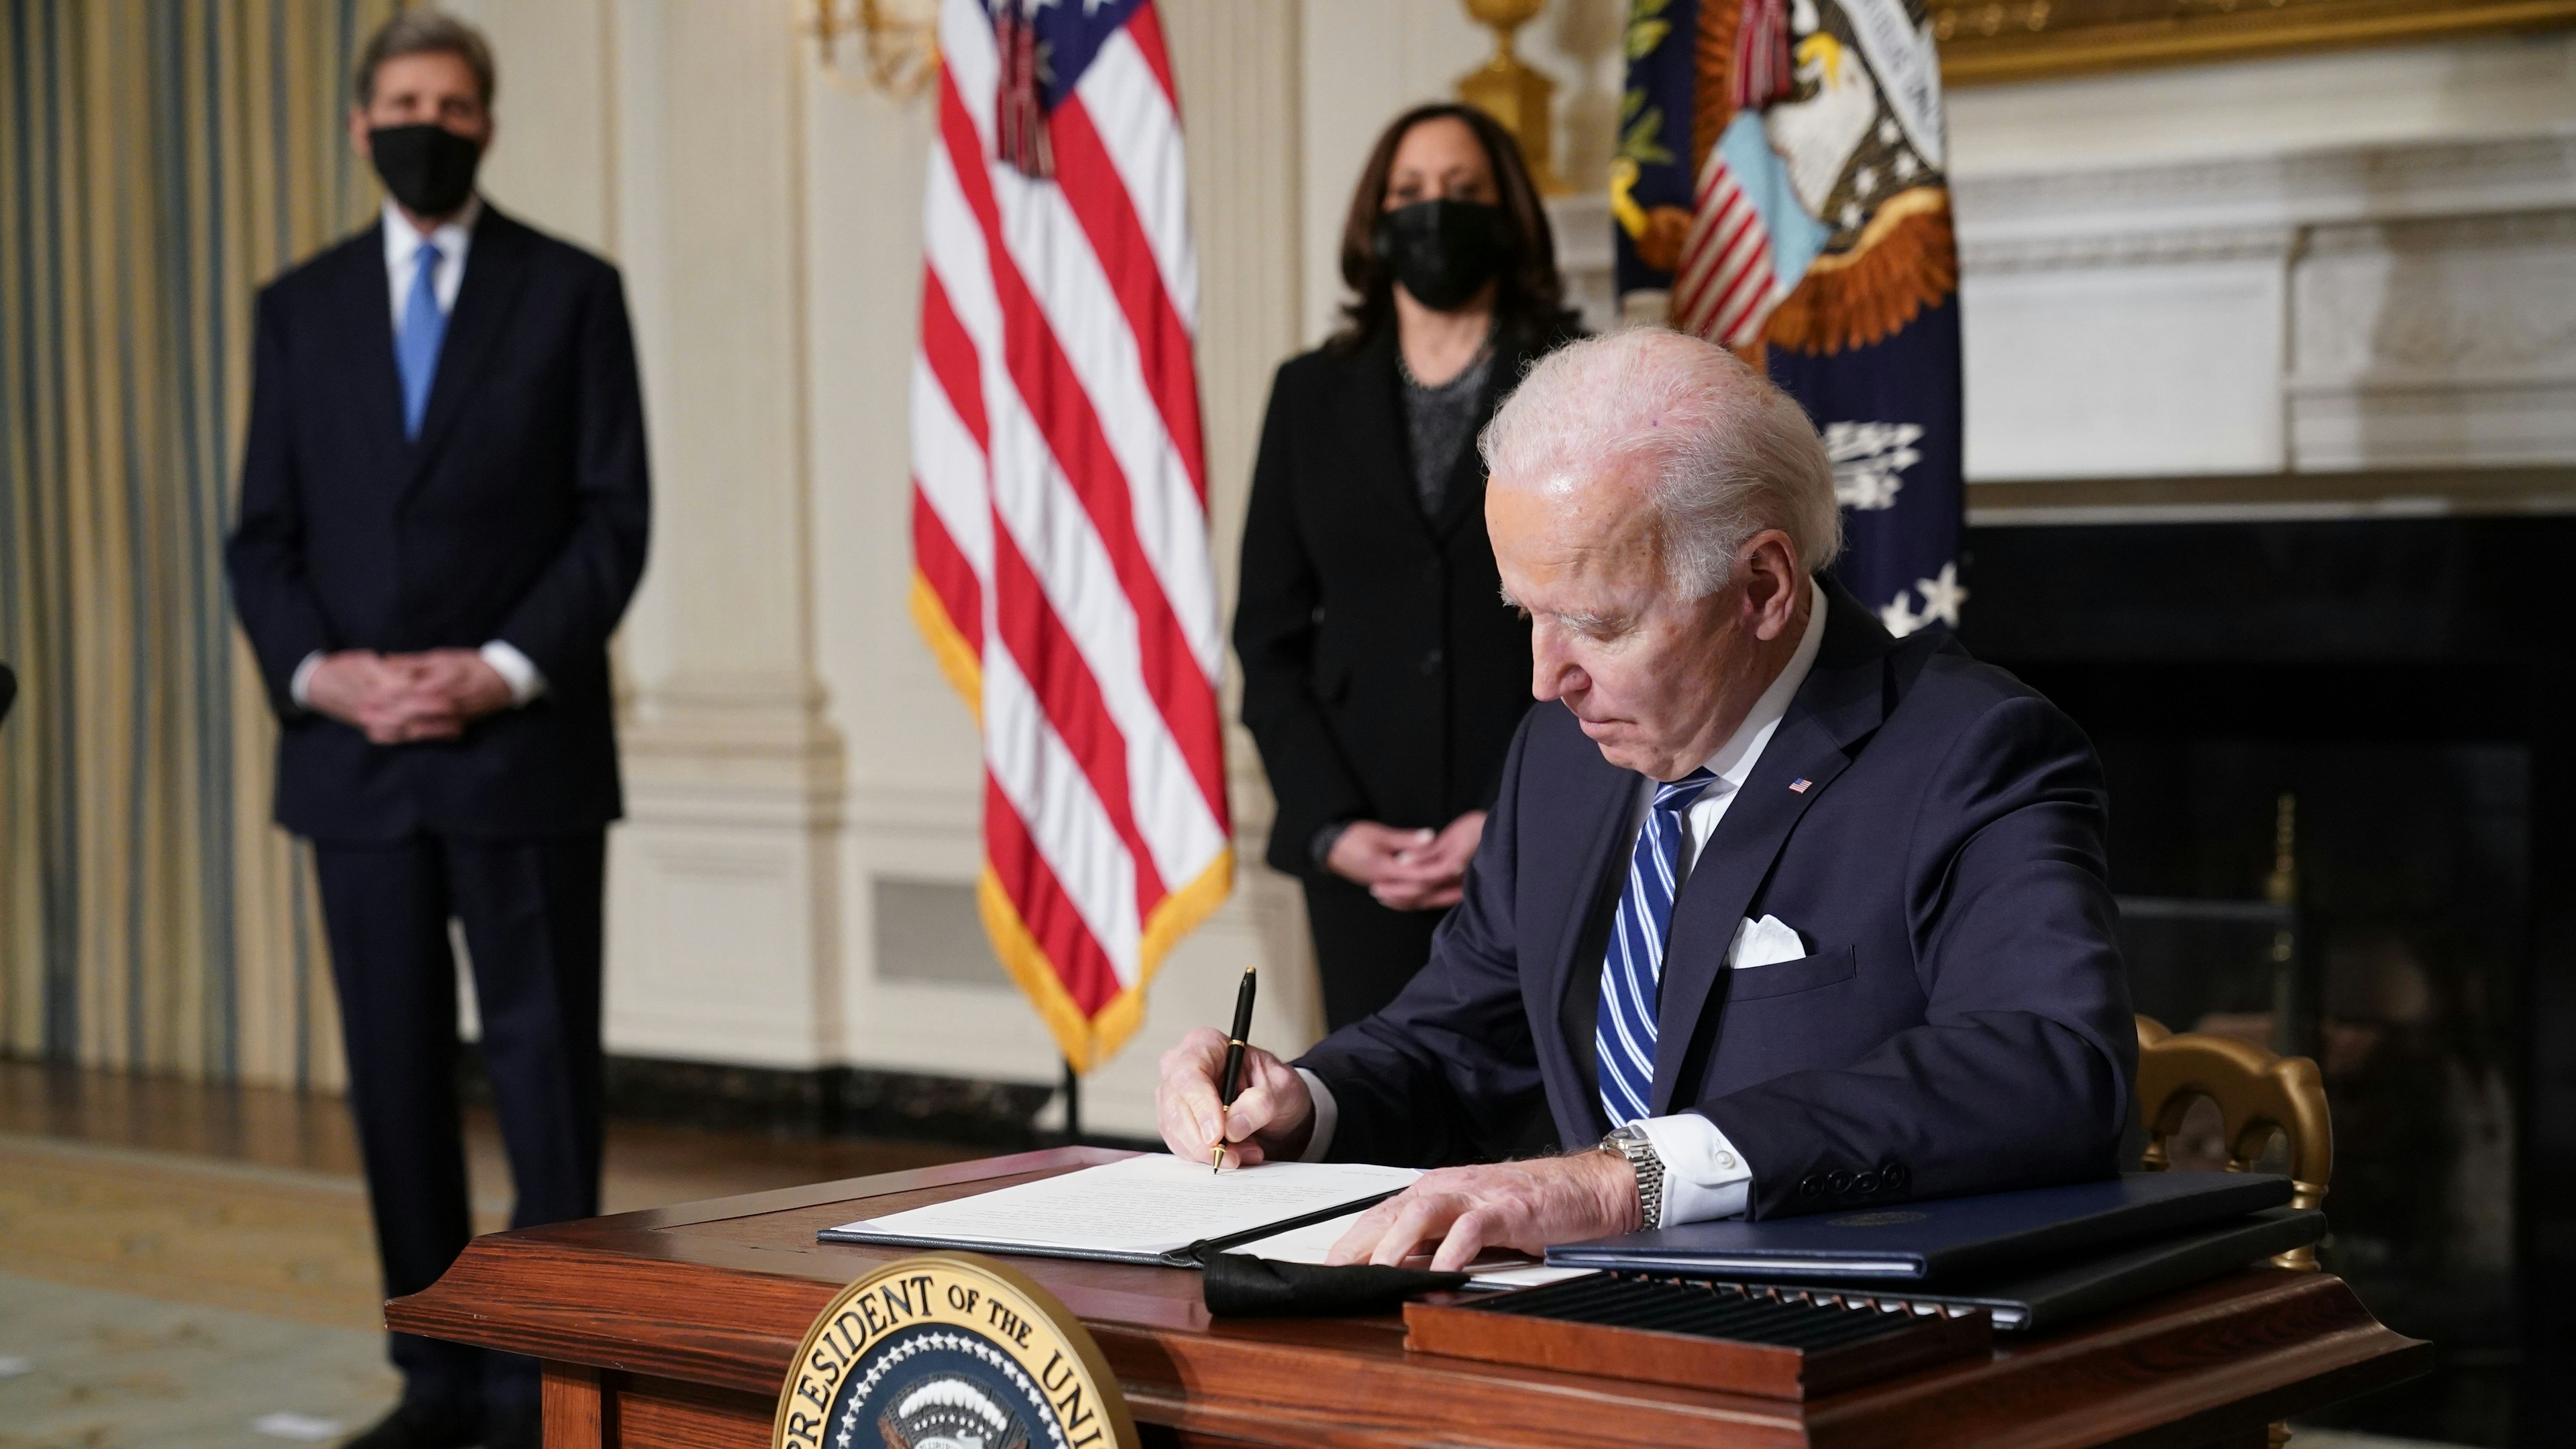 Biden signing executive orders on climate change on January 27, 2021.